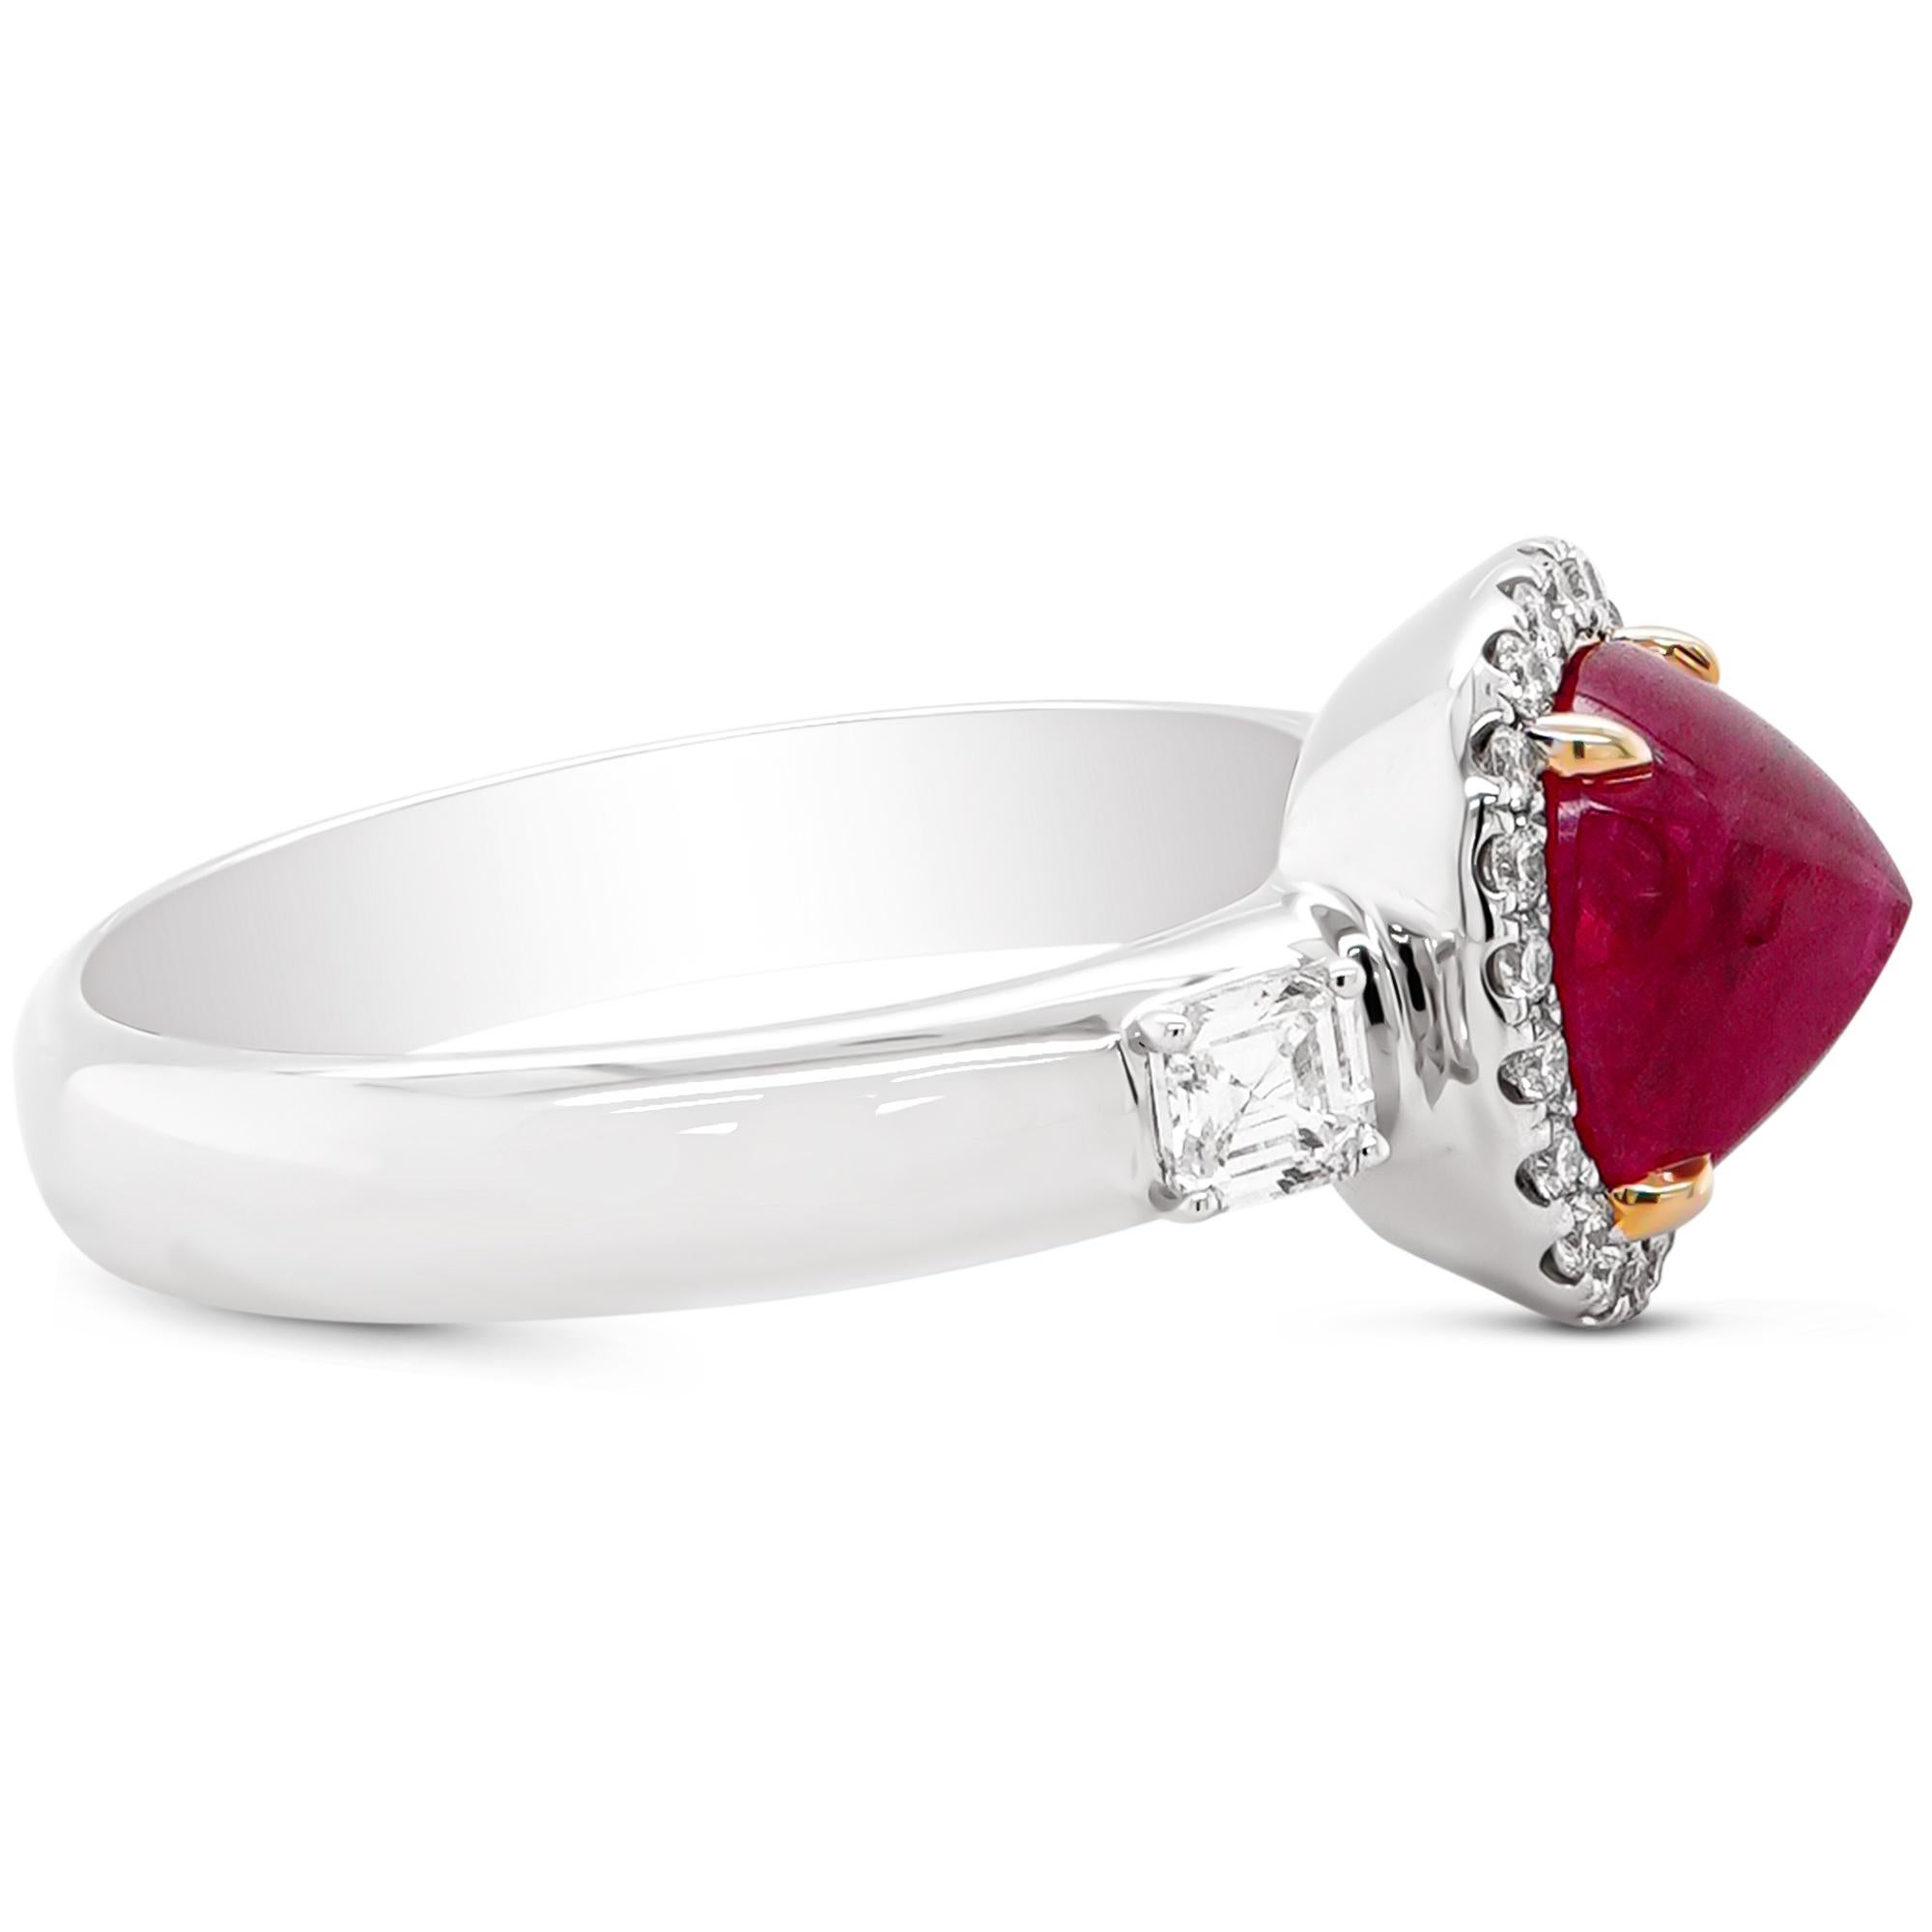 The term Crimson Red was selected to accompany the best (rarest and most beautiful) rubies beyond fluorescence. Crimson describes a rich, saturated red colour, allowing also a minute admixture of purple.

The ring has a 2.51 carat crimson red ruby